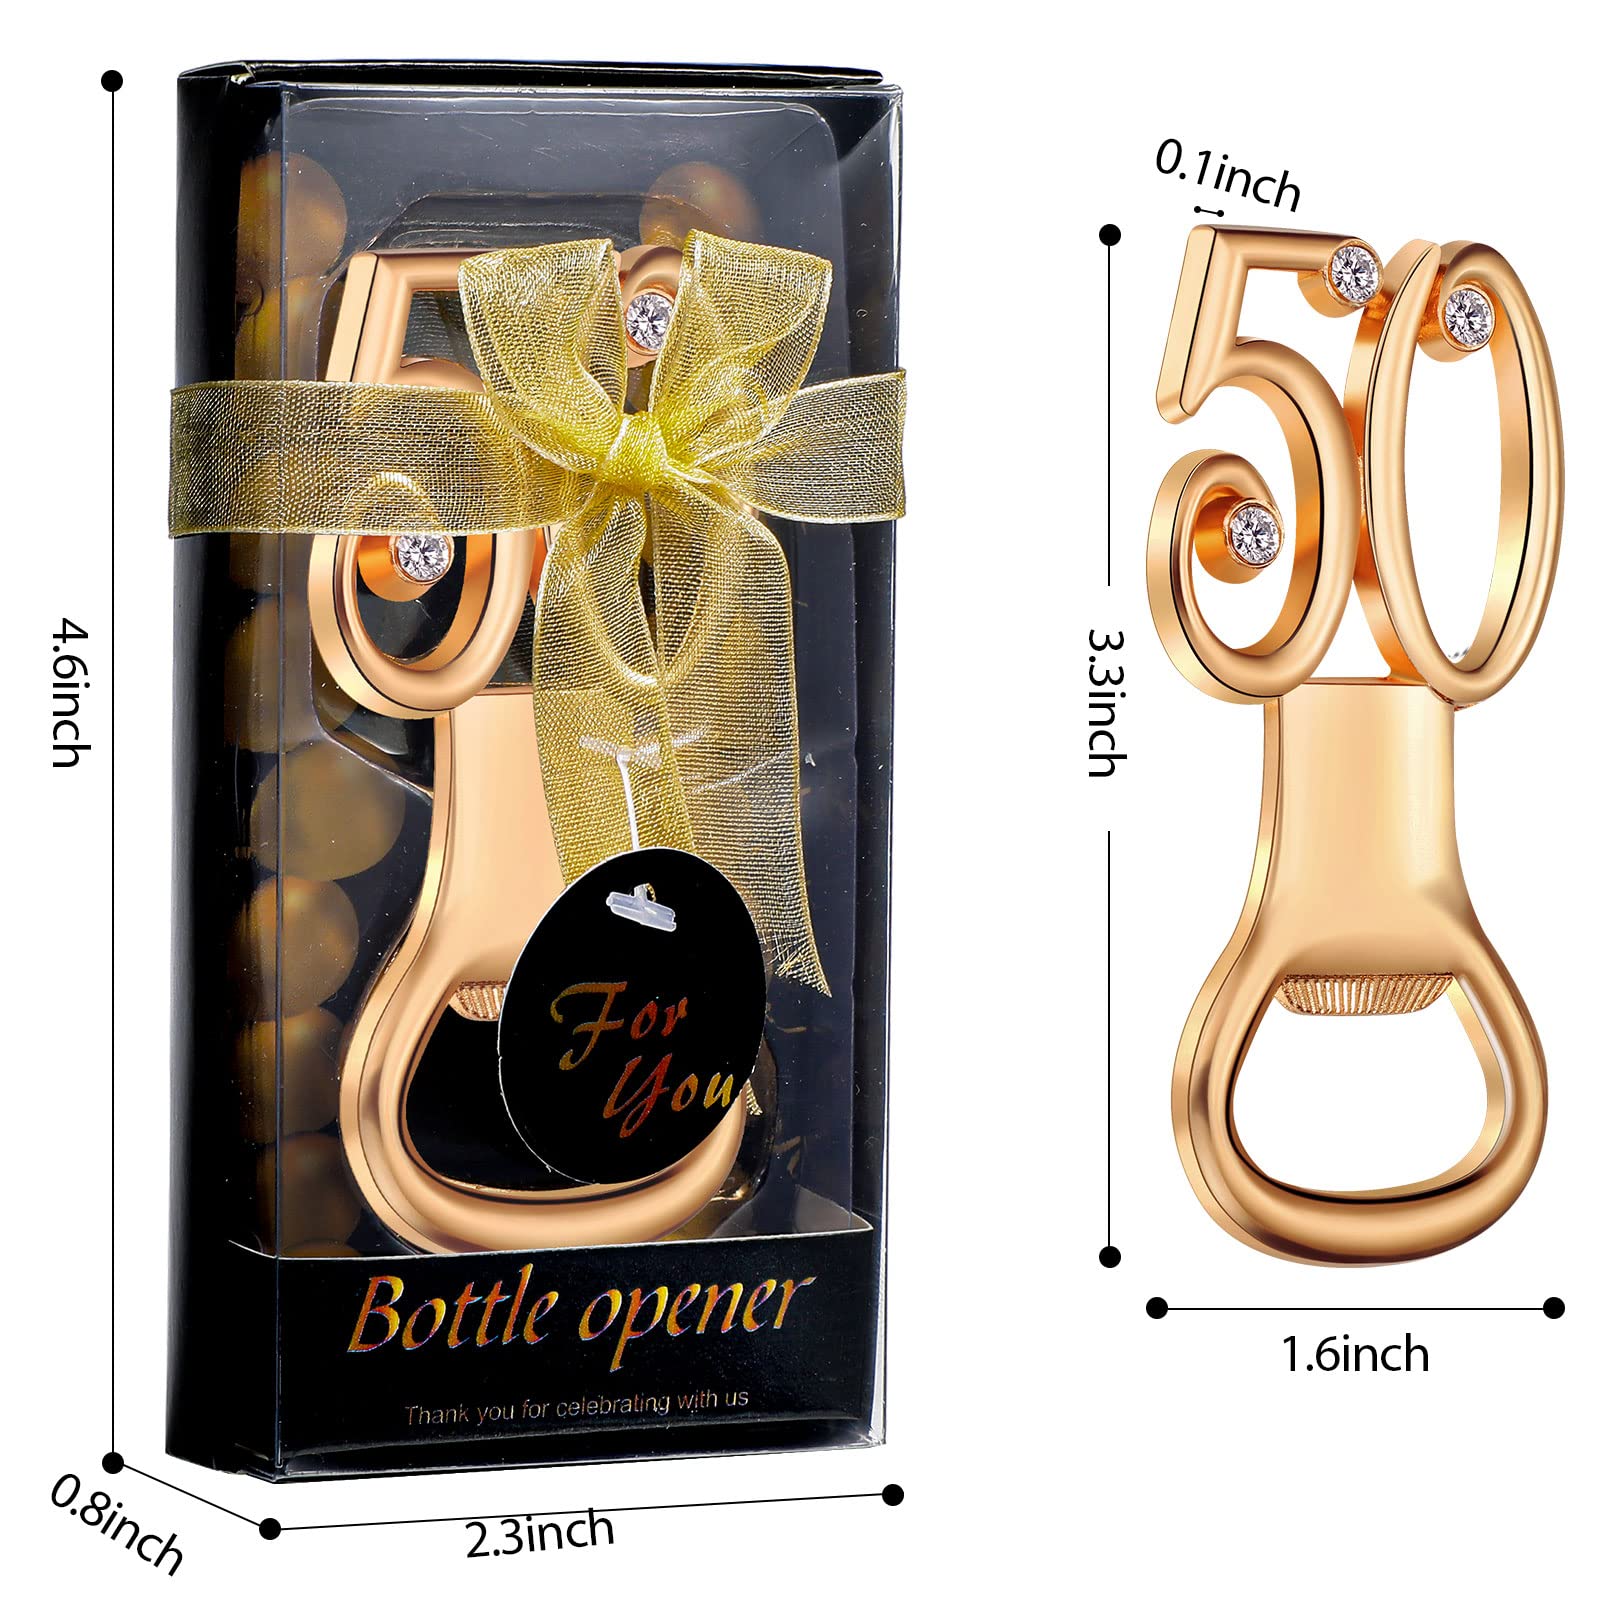 36 Pieces 50th Bottle Openers Golden Birthday Bottle Opener with Present Box Packing for 50th Birthday Party Favors 50th Wedding Anniversary Party Souvenirs Decorations Bottle Opener (Black Package)